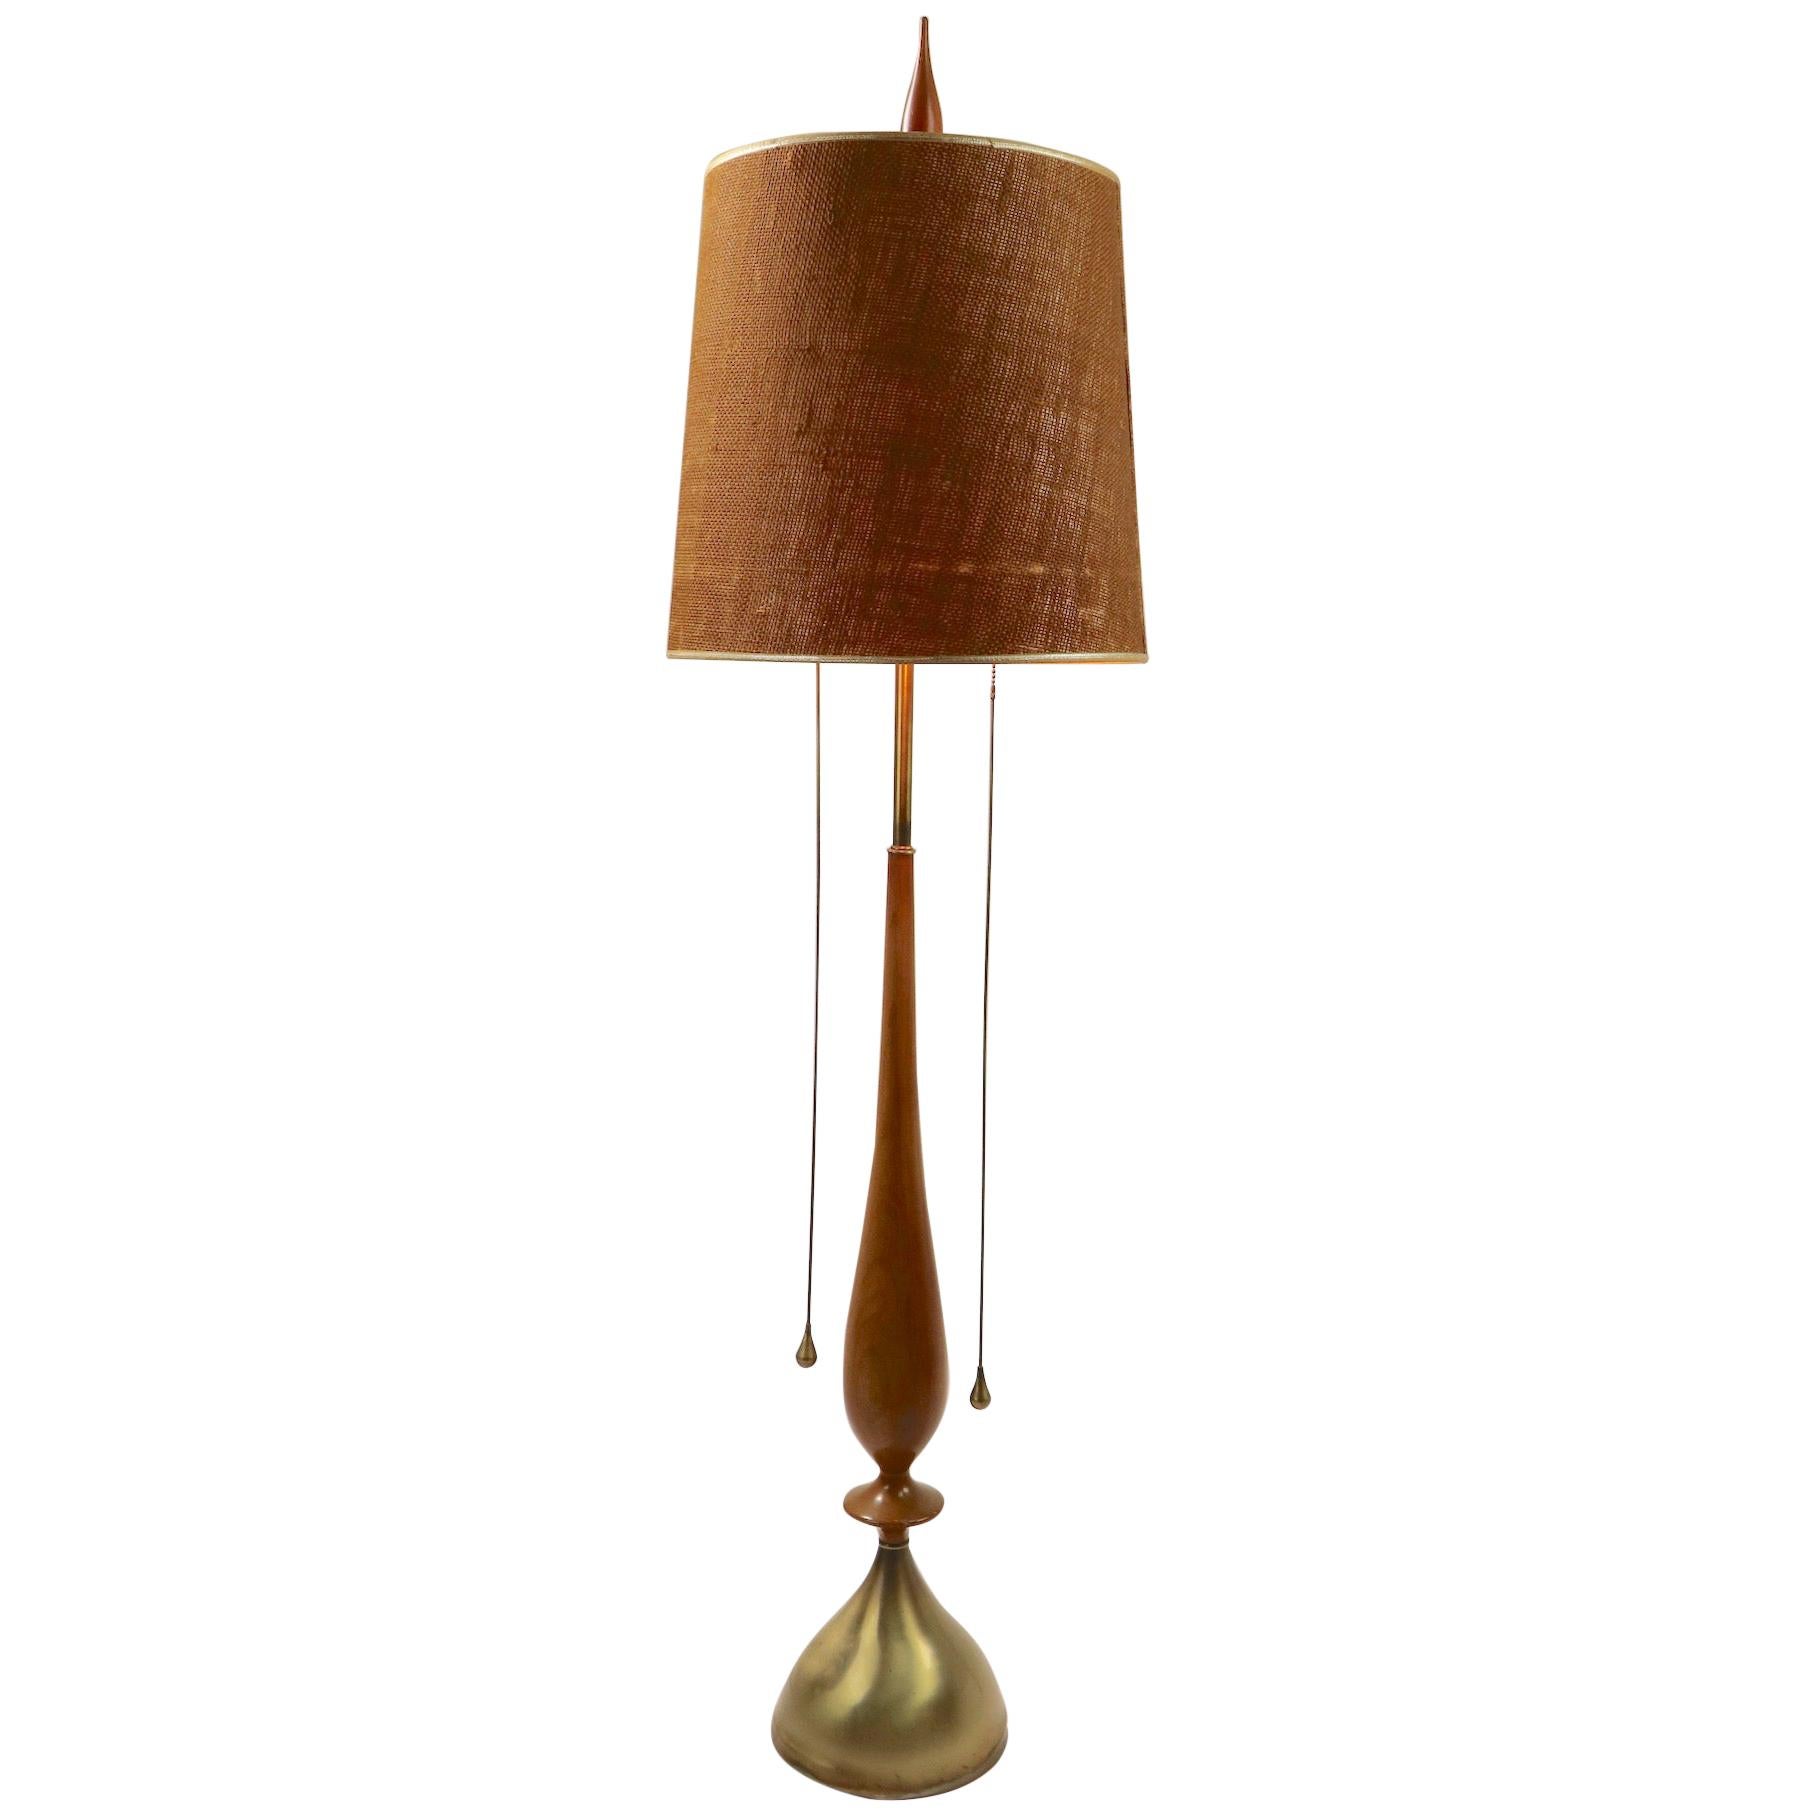 Tony Paul for Westwood Industries Mid Century Table Lamp